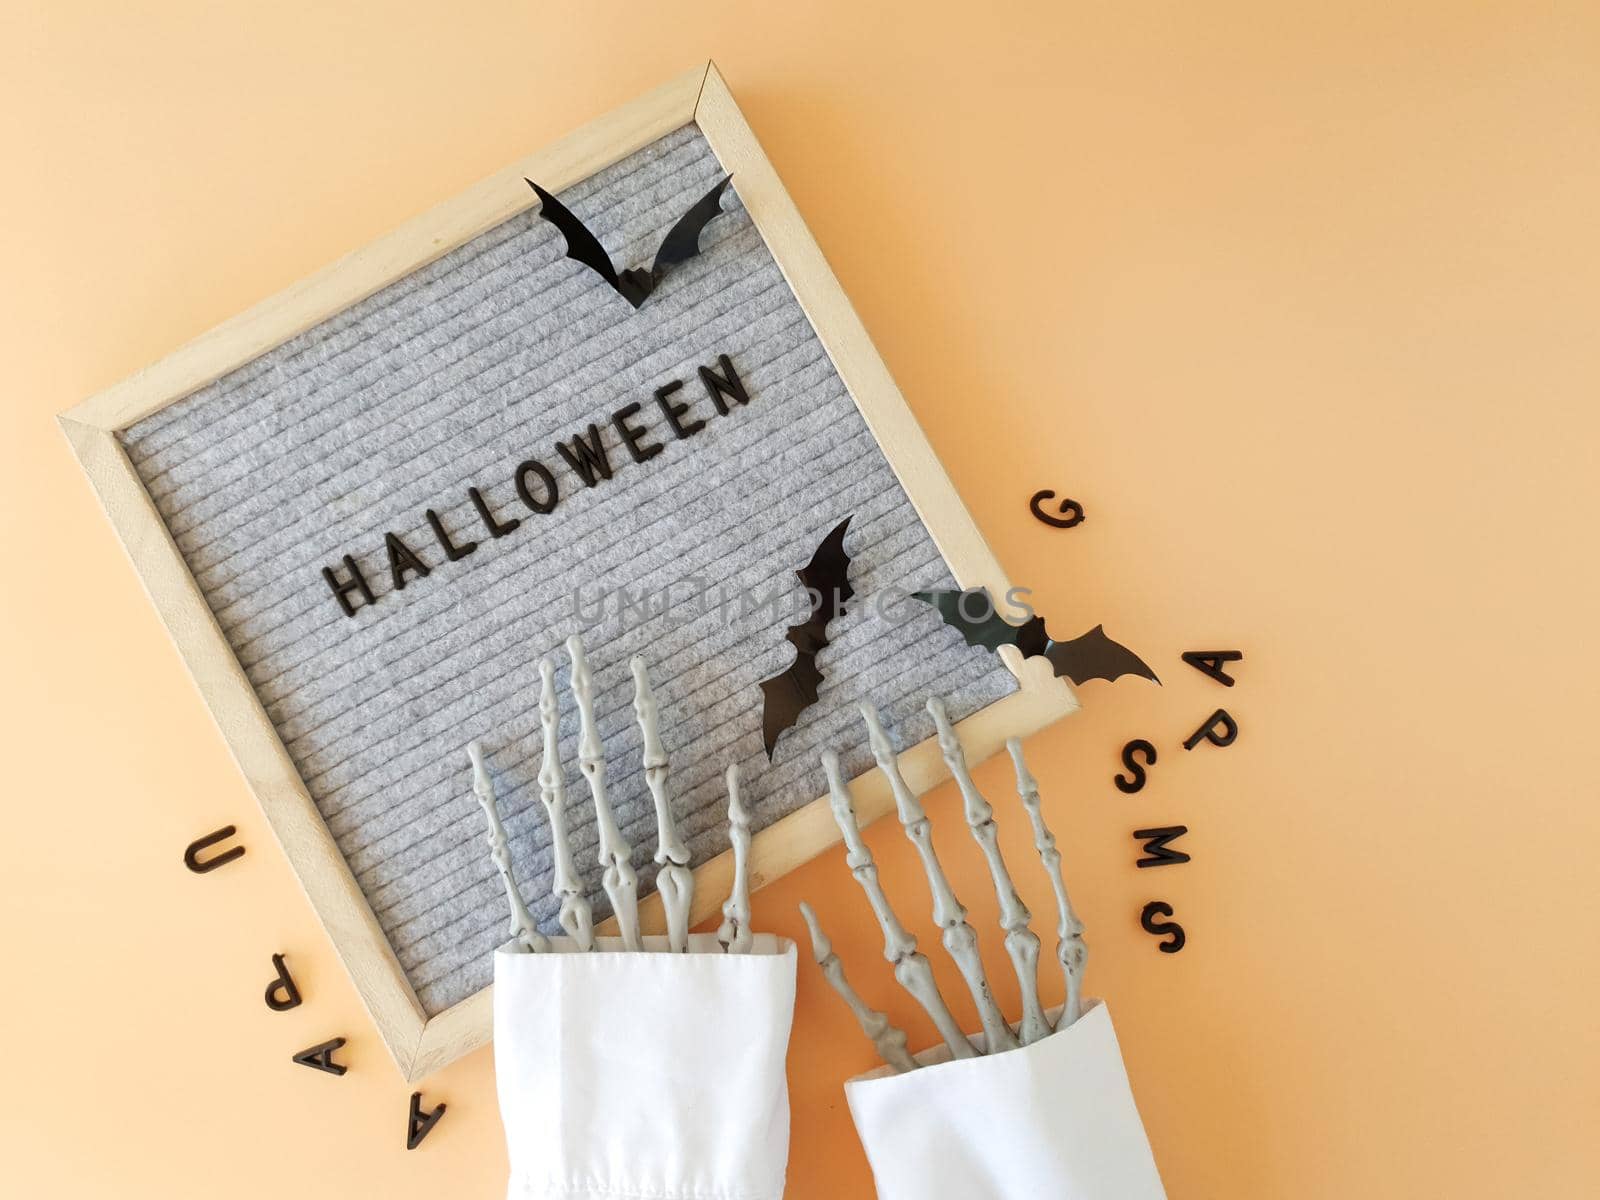 The skeleton's hand collects the word Halloween in a frame by Spirina